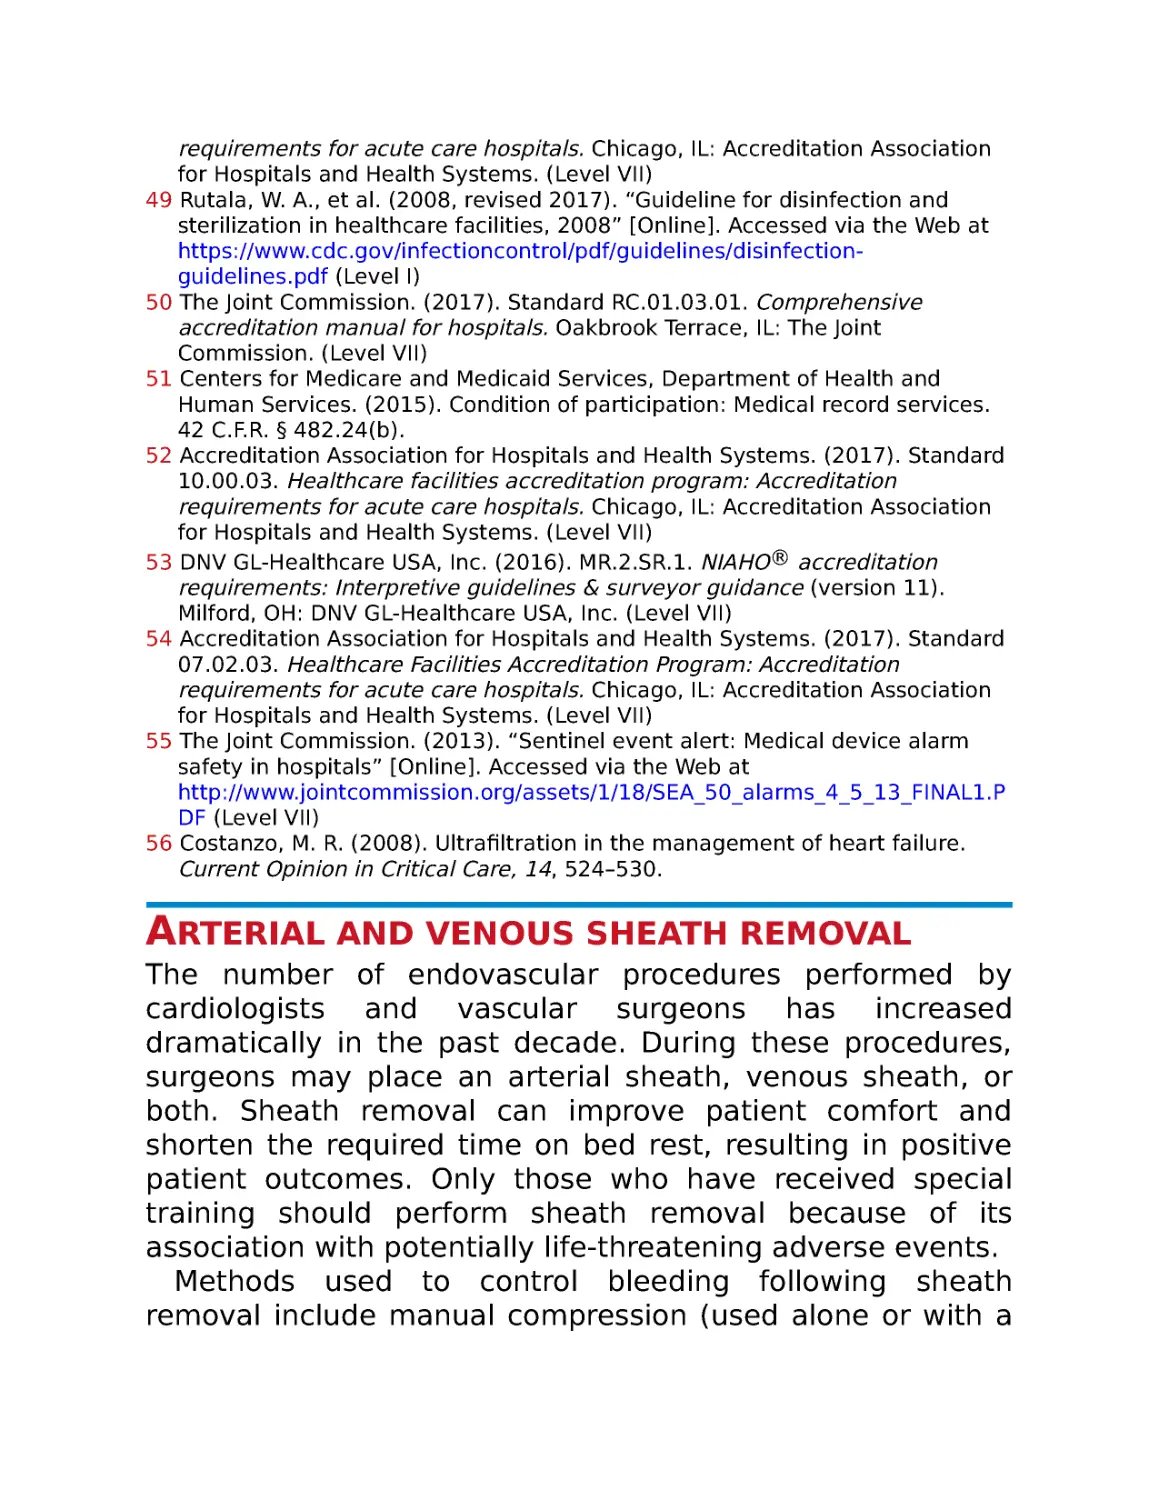 Arterial and venous sheath removal